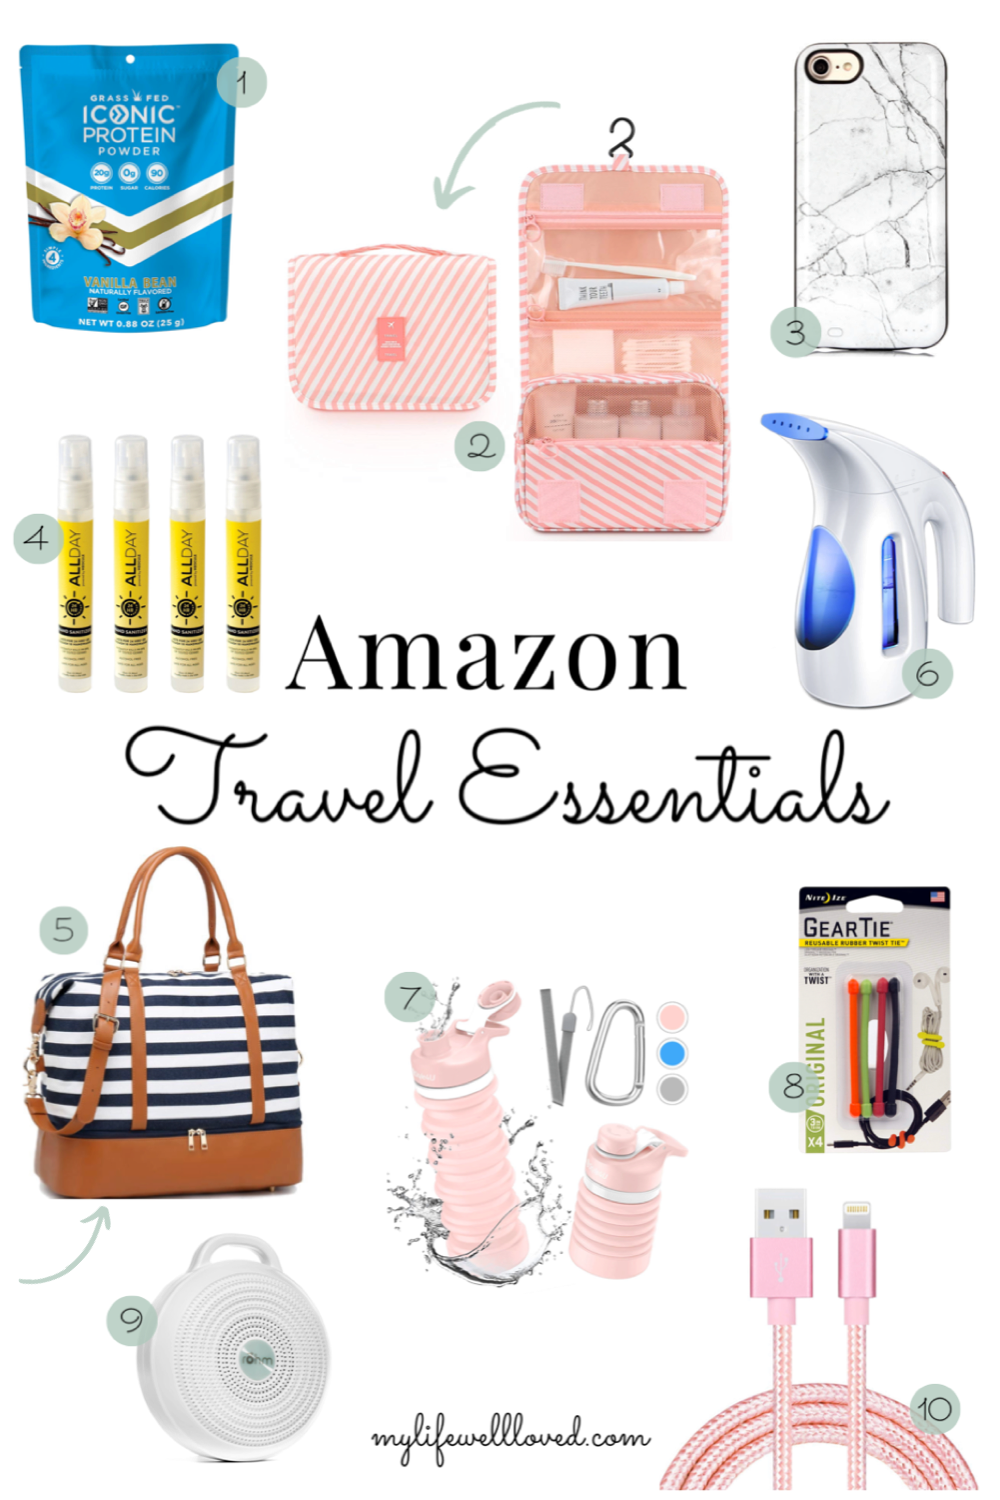 Travel Essentials, US life and style